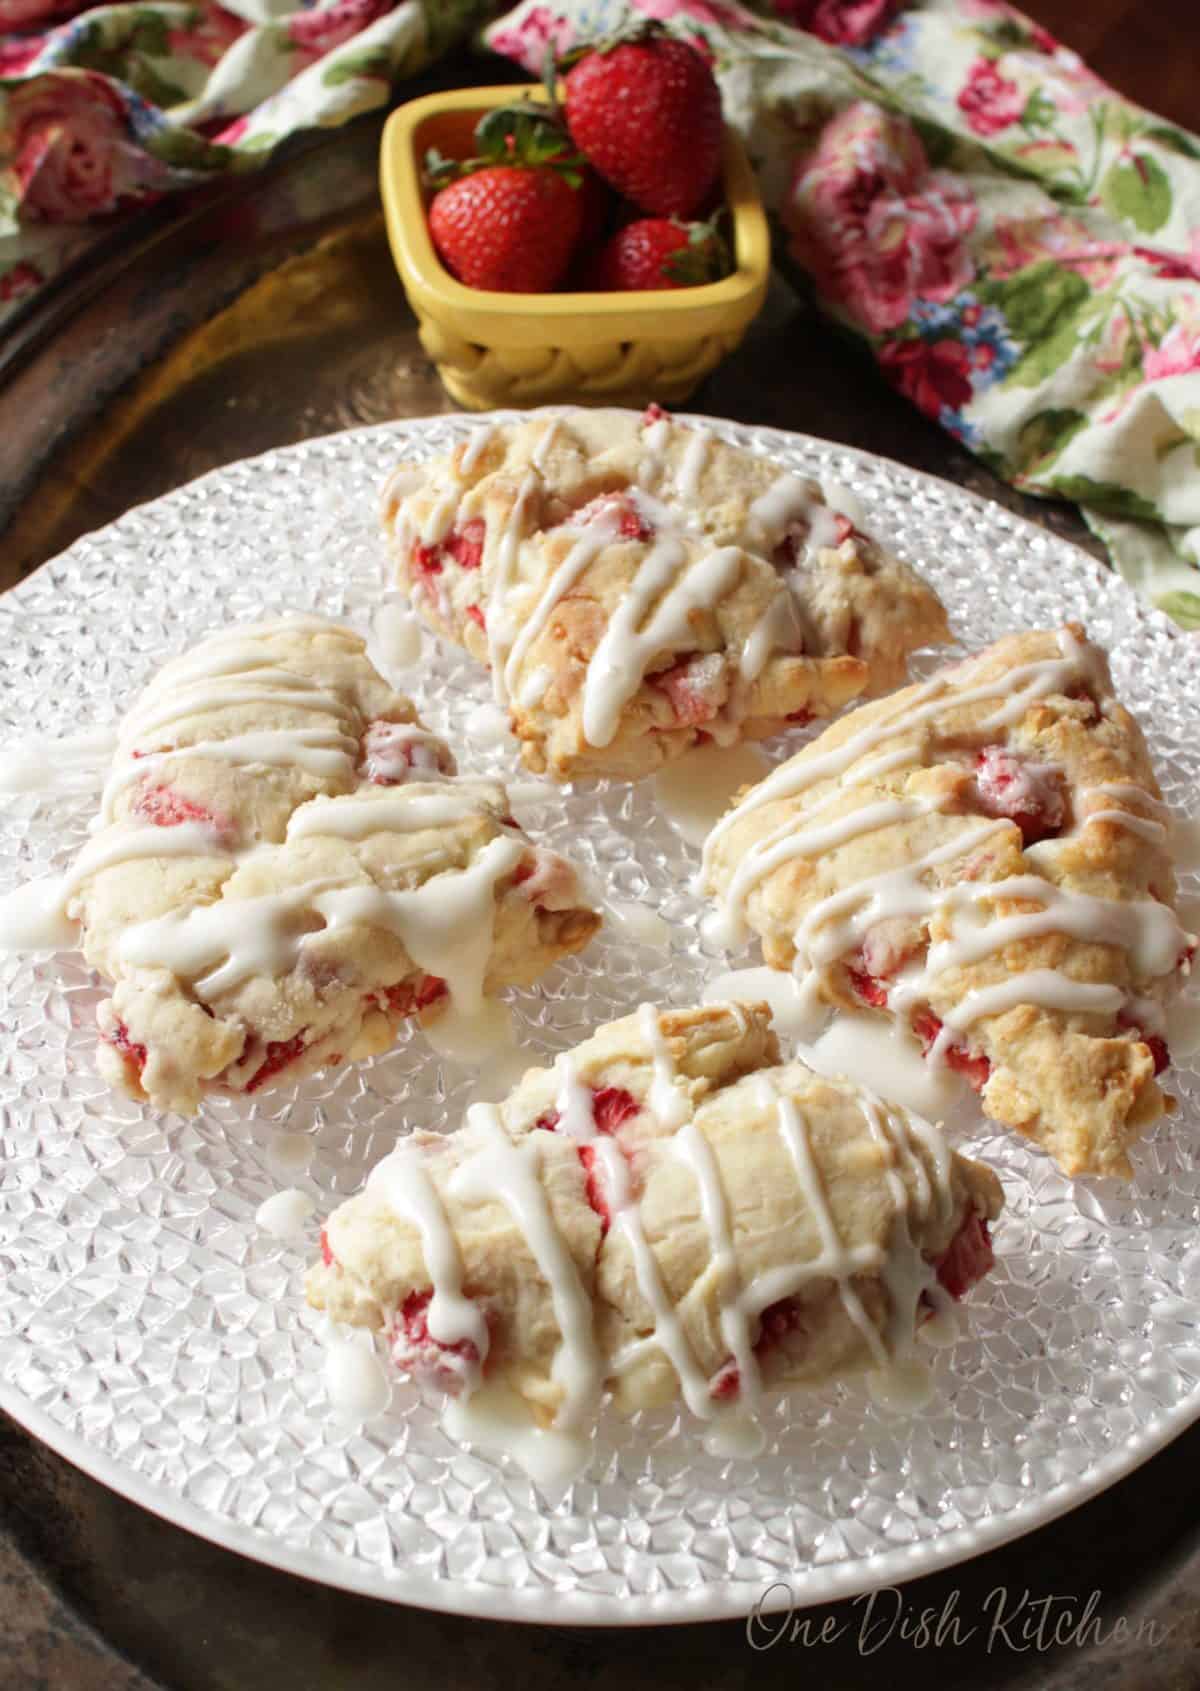 A plate of four strawberry scones with melted white chocolate drizzled over the top next to a small bowl of strawberries.